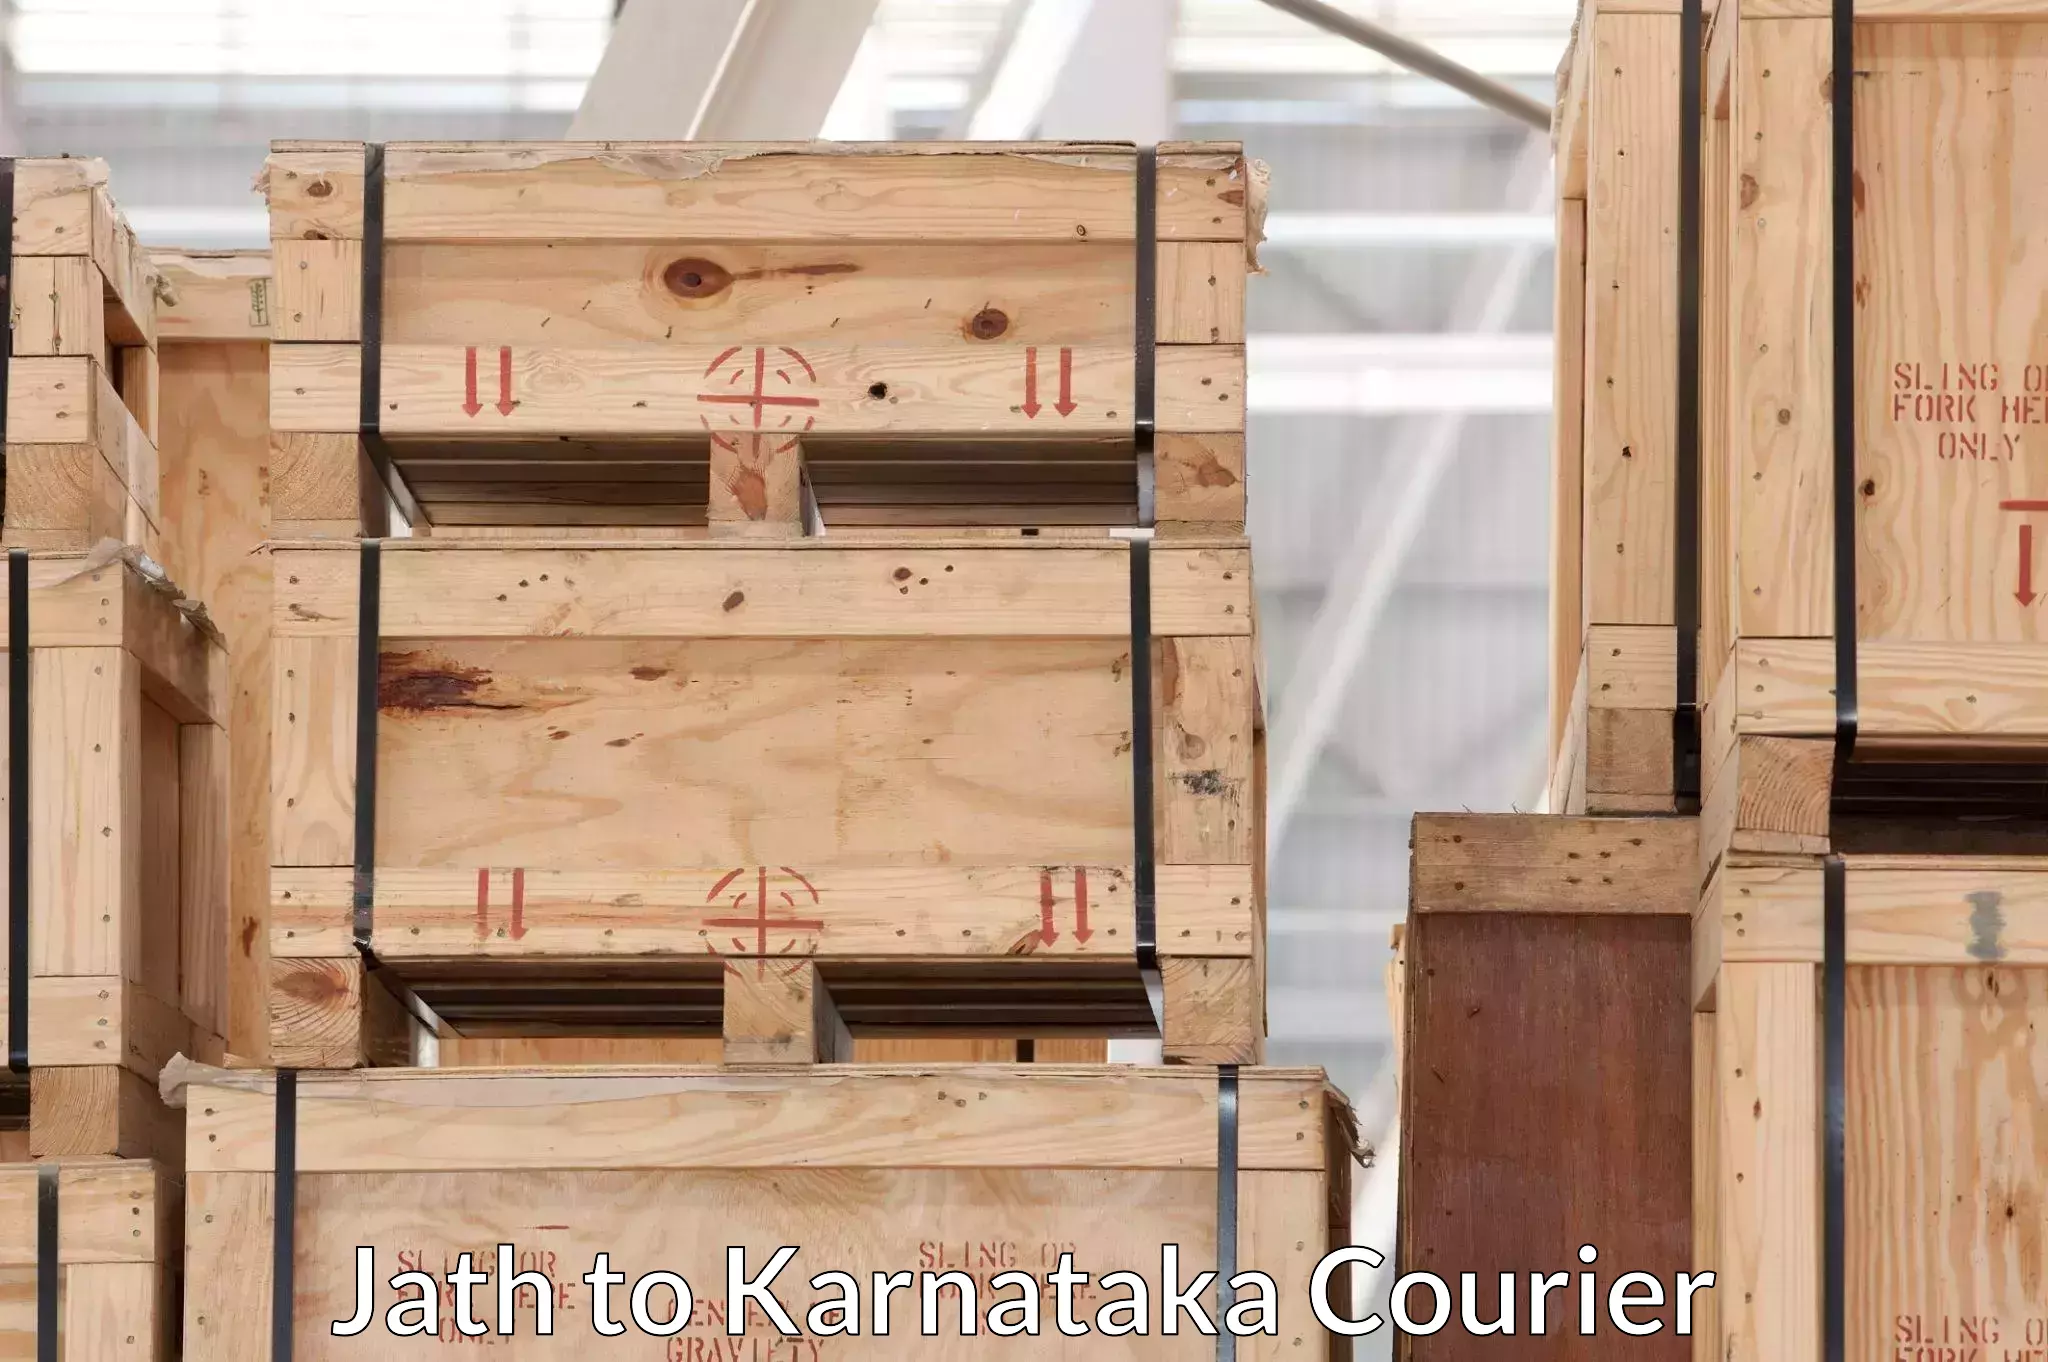 Tailored relocation services in Jath to Kanjarakatte